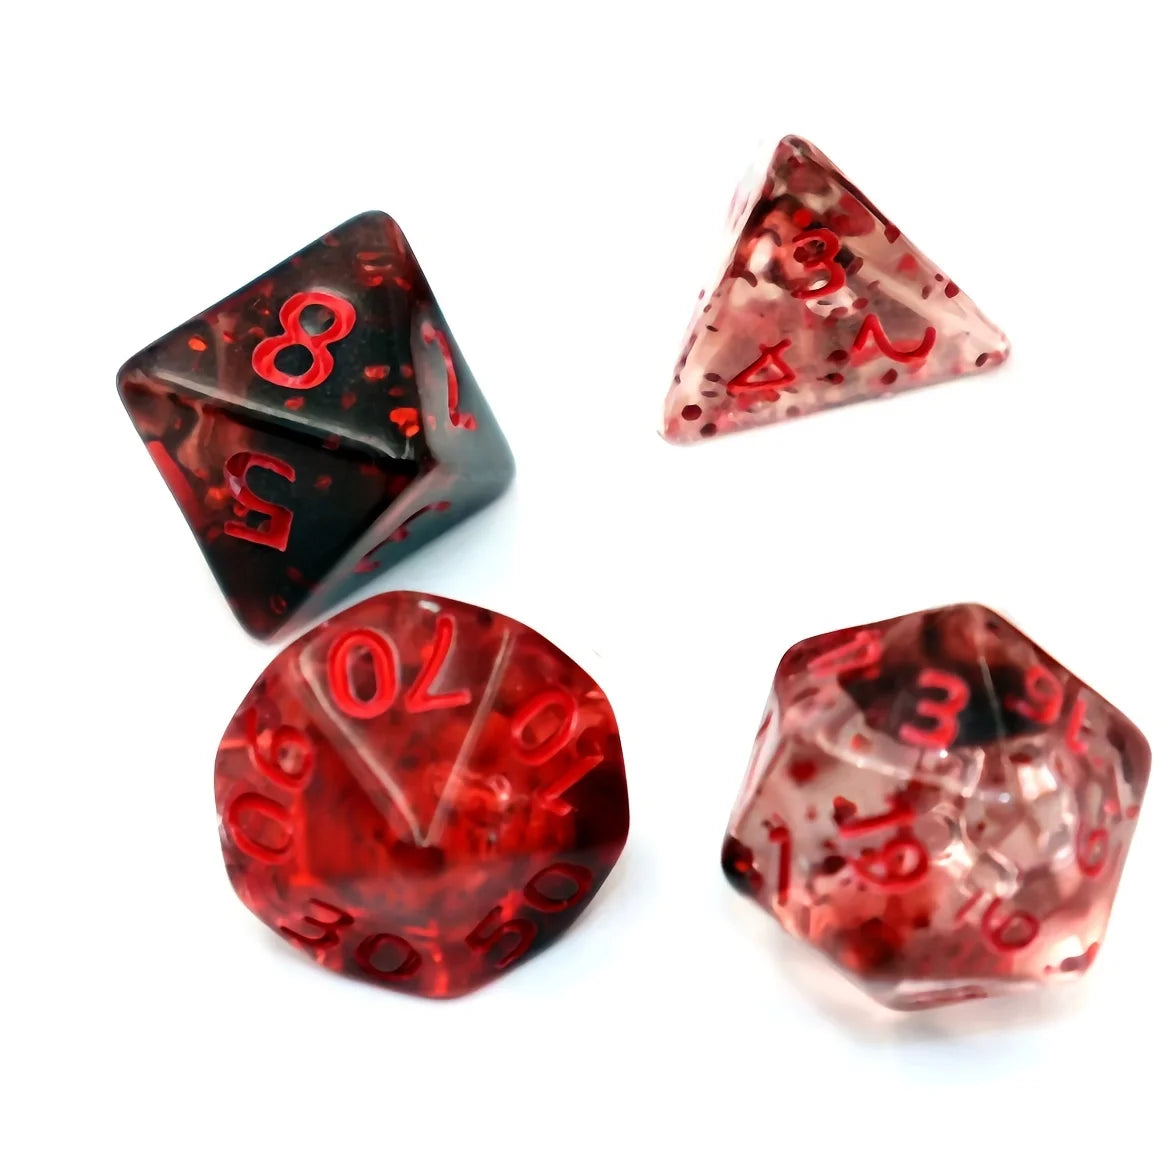 7pcs Set Crystal Style DND Dice Set, Polyhedral Table Game Dice Role-Playing RPG Dice With Box